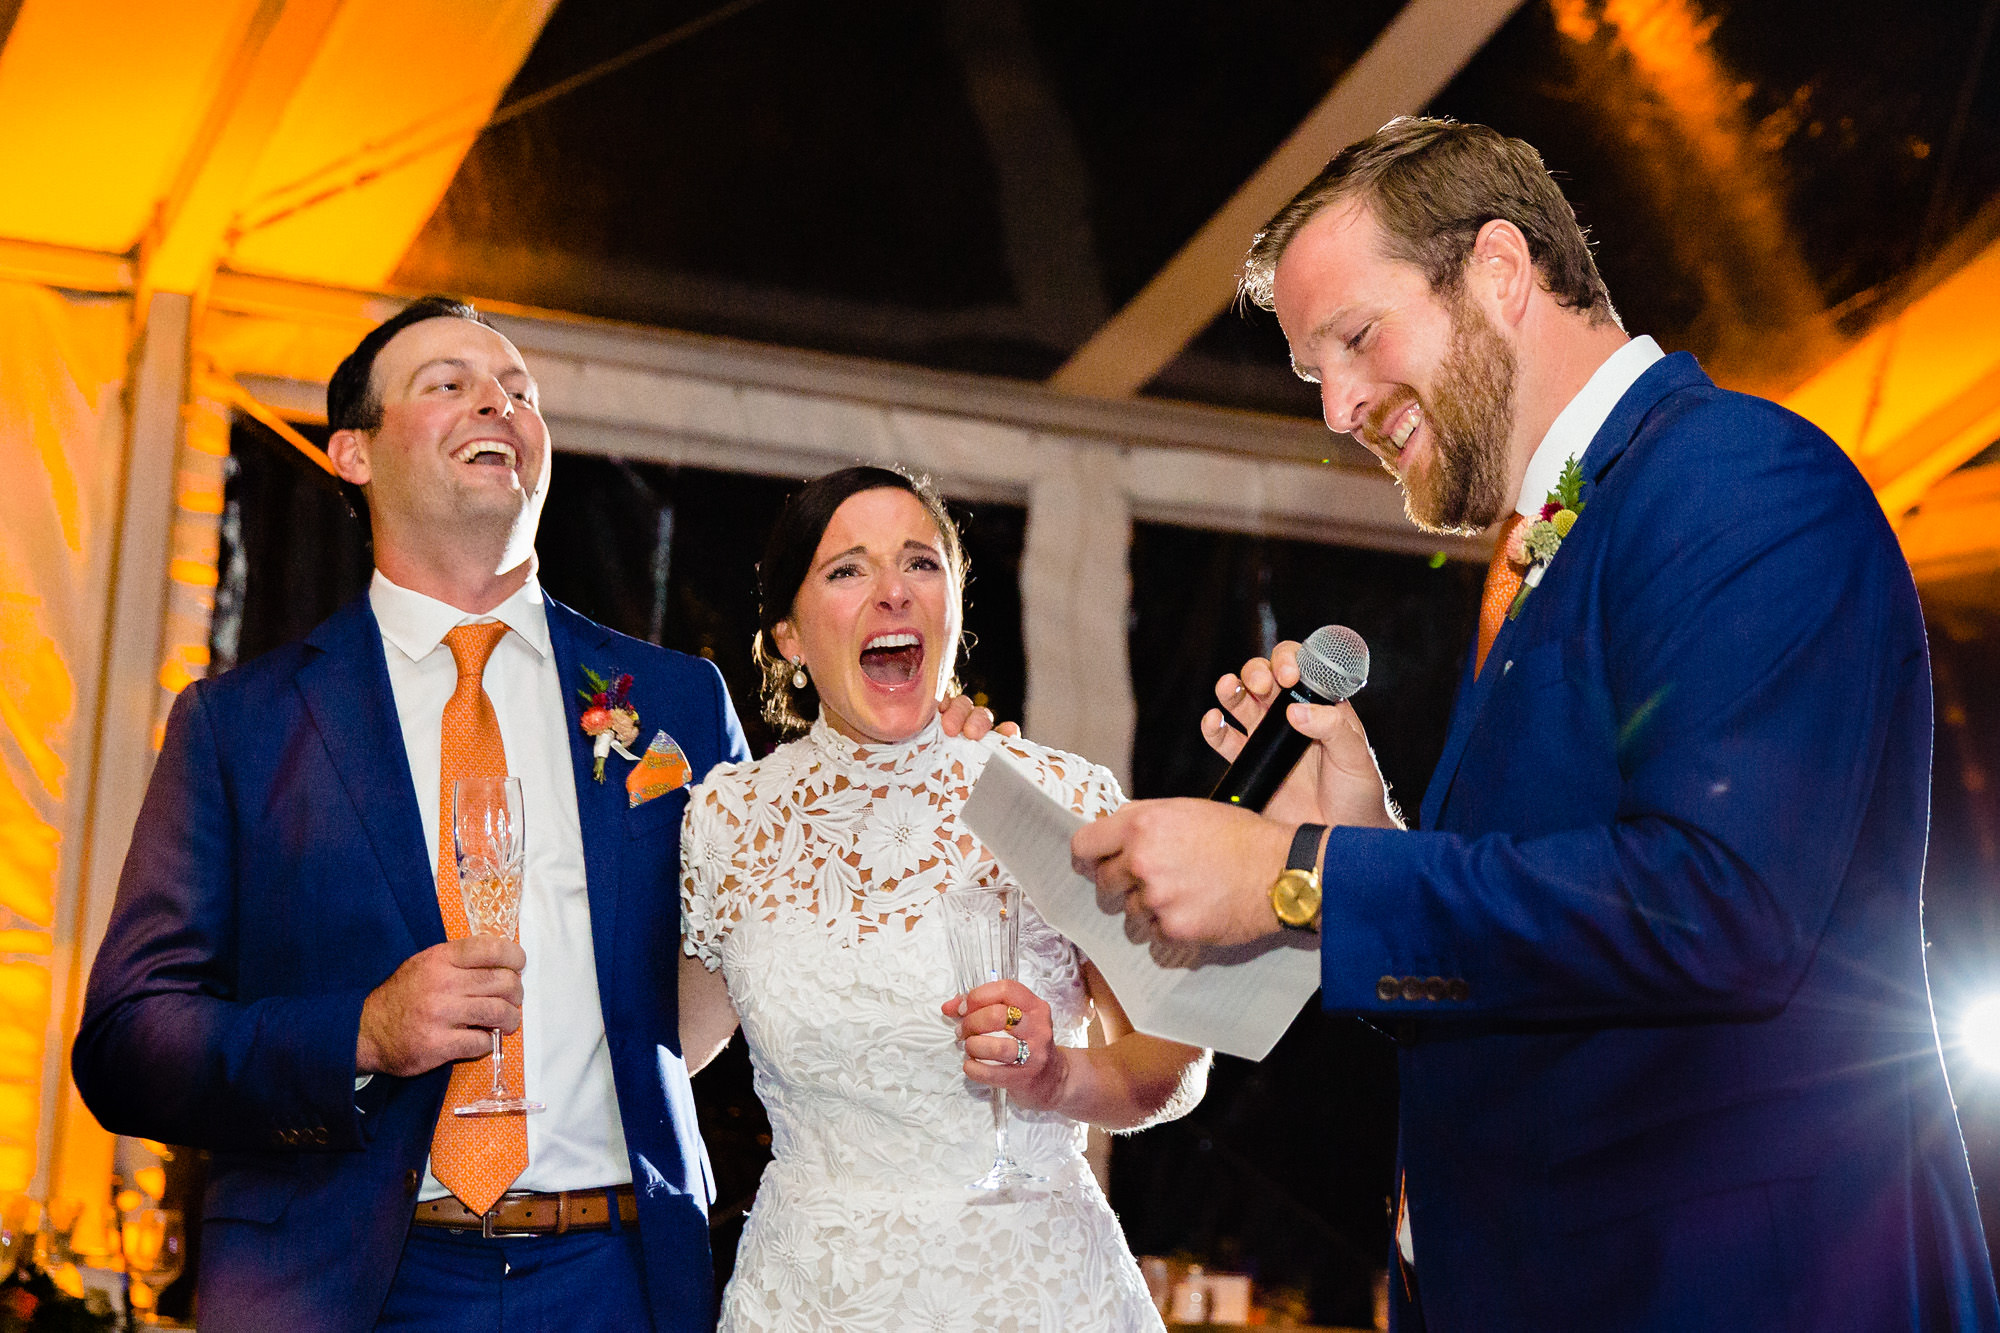 The brother of the bride gives an emotional toast at a midcoast Maine wedding